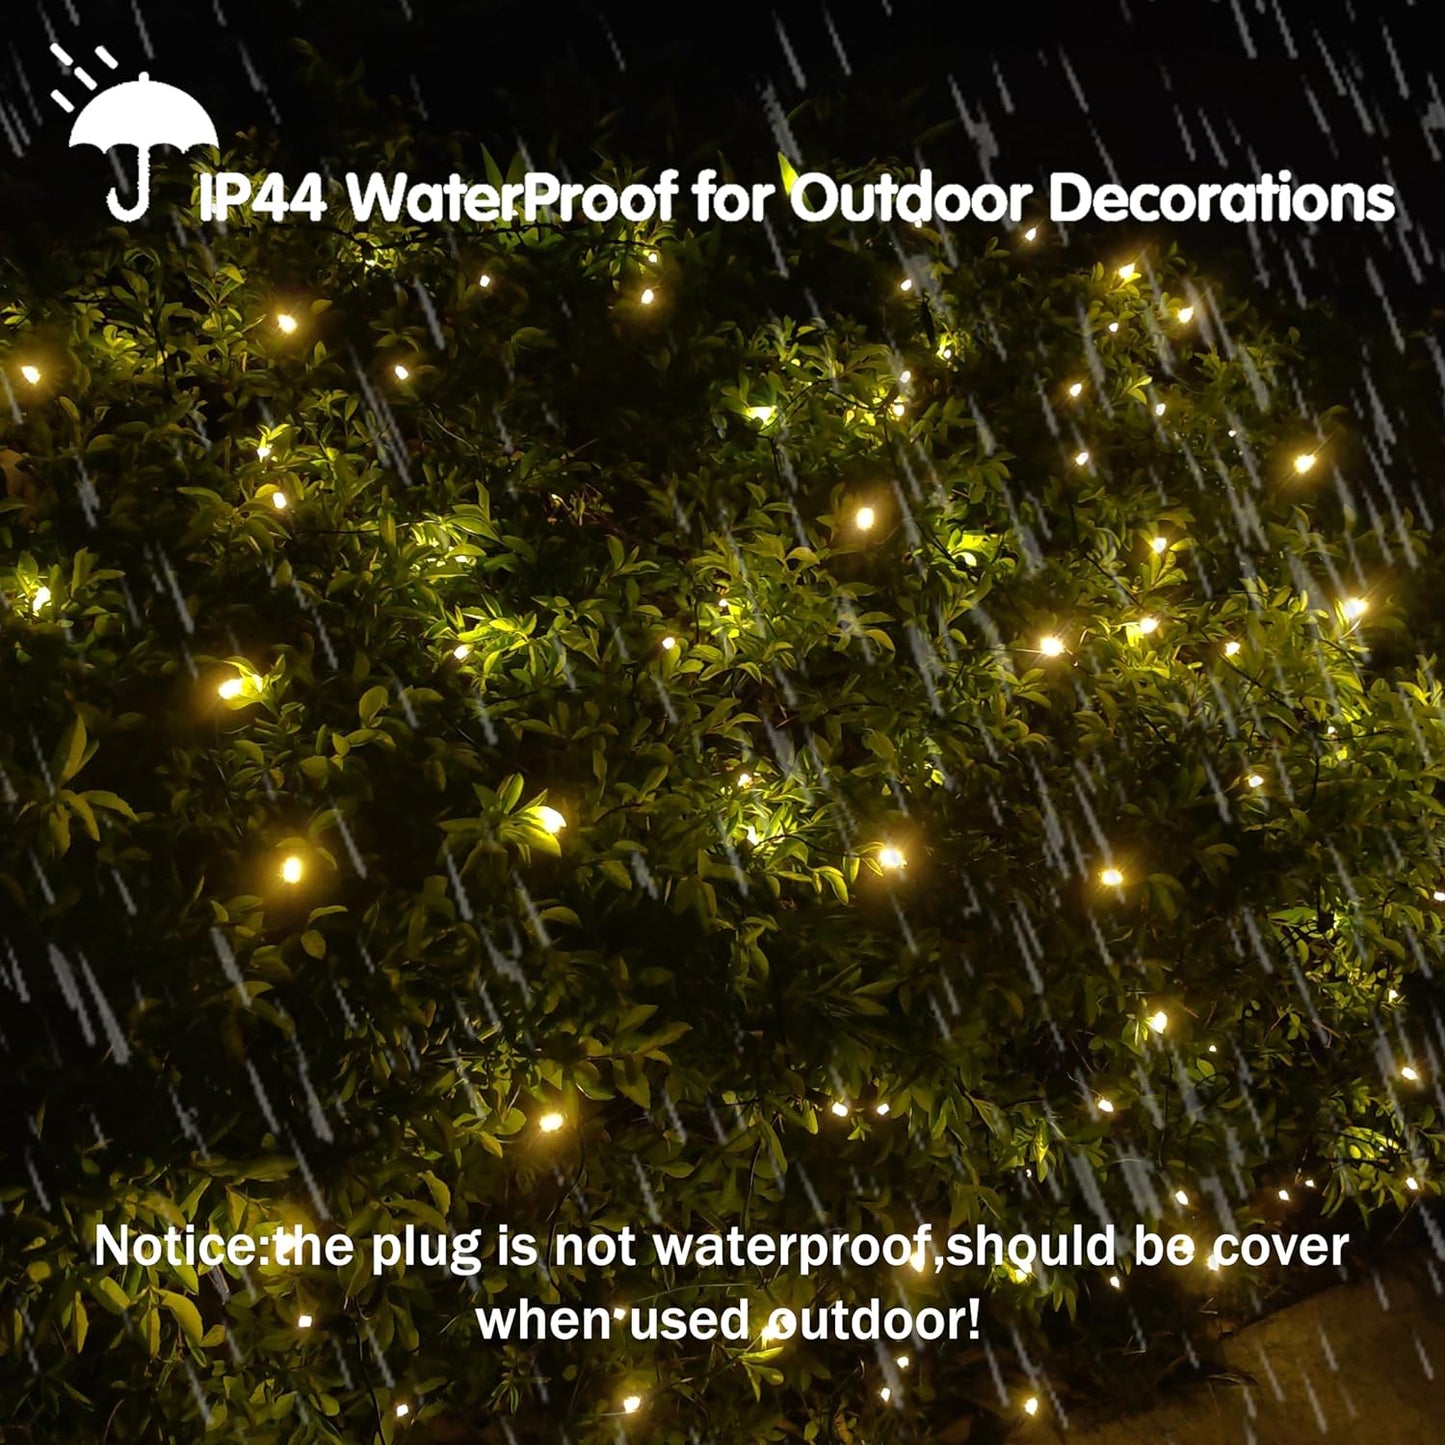 LED Christmas Net Lights Outdoor Christmas Decorations for Bushes,100Led 5Ftx5Ft Connectable Green Wire Net Christmas Lights for Outdoor Indoor Yard Mesh Shrub Tree Decor ,UL Certified(Warm White)